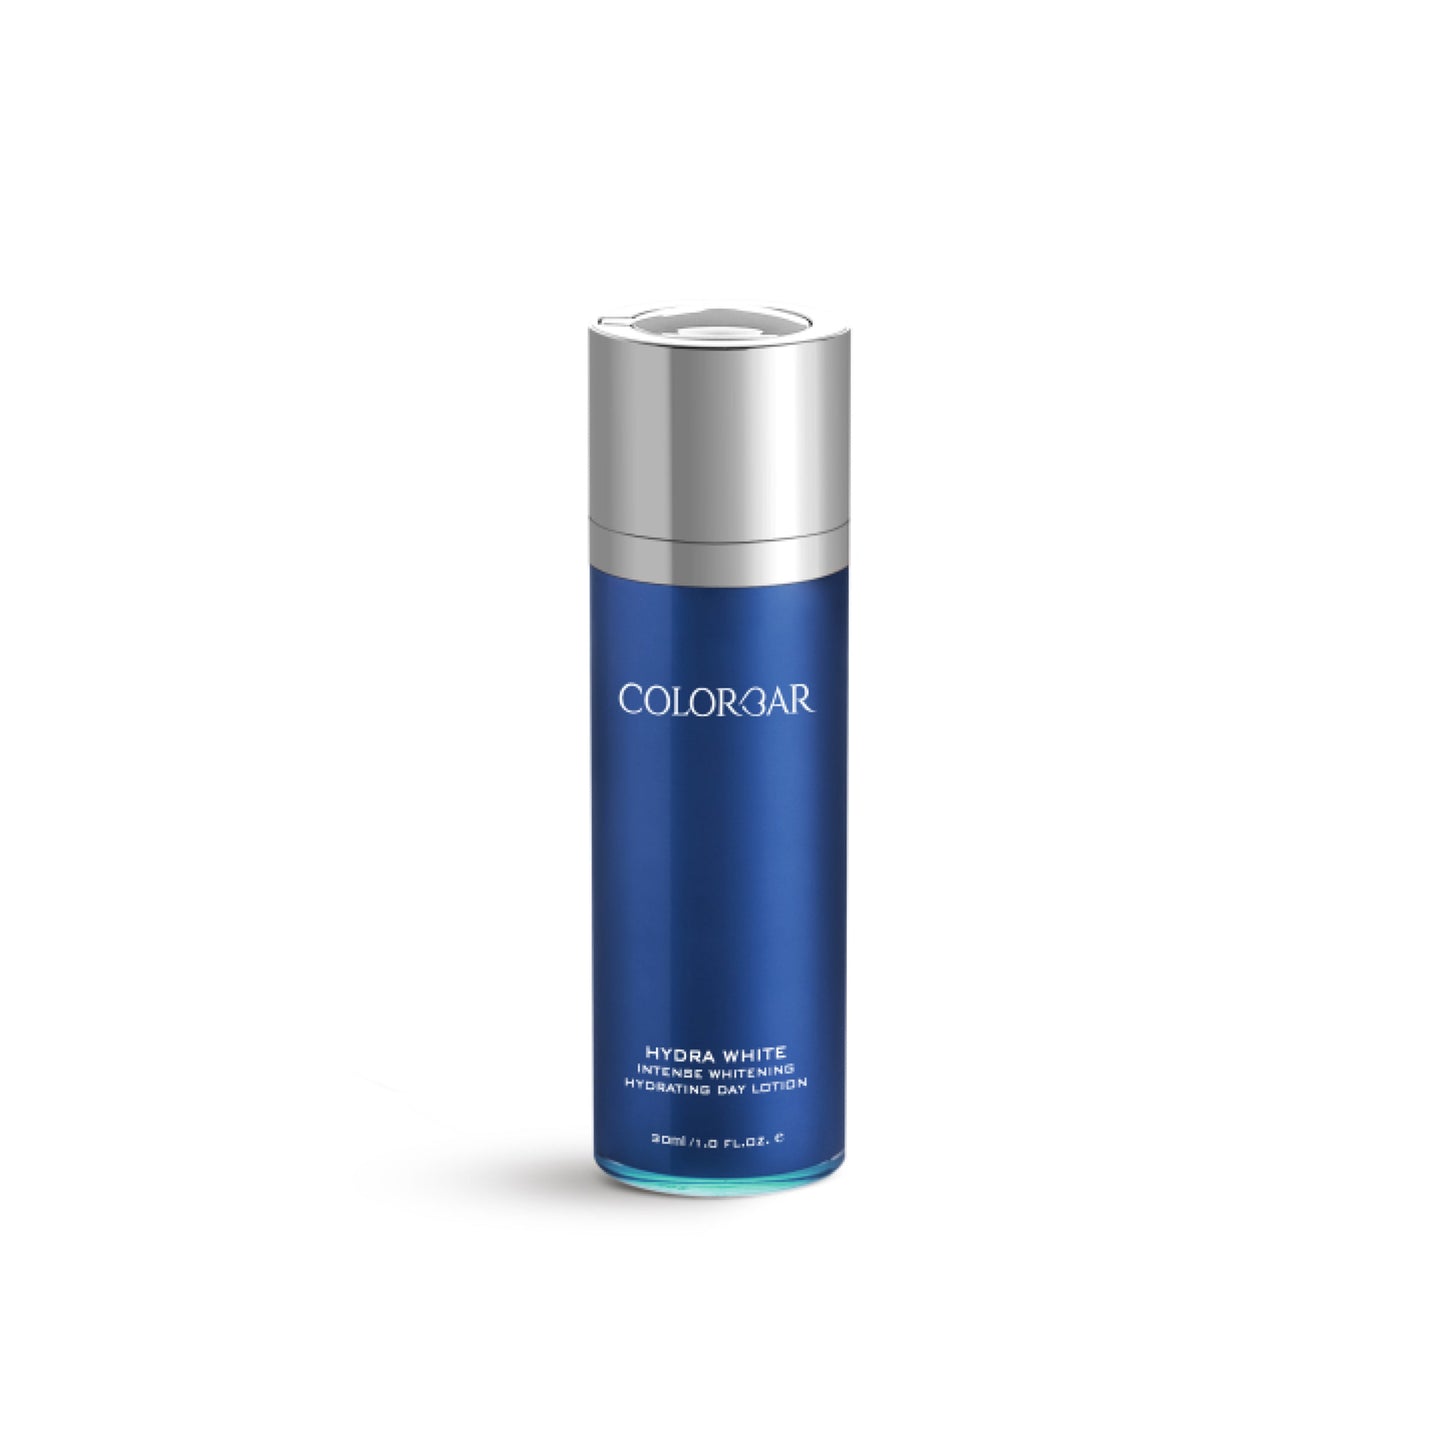 Colorbar Hydra White Hydra White Day Lotion